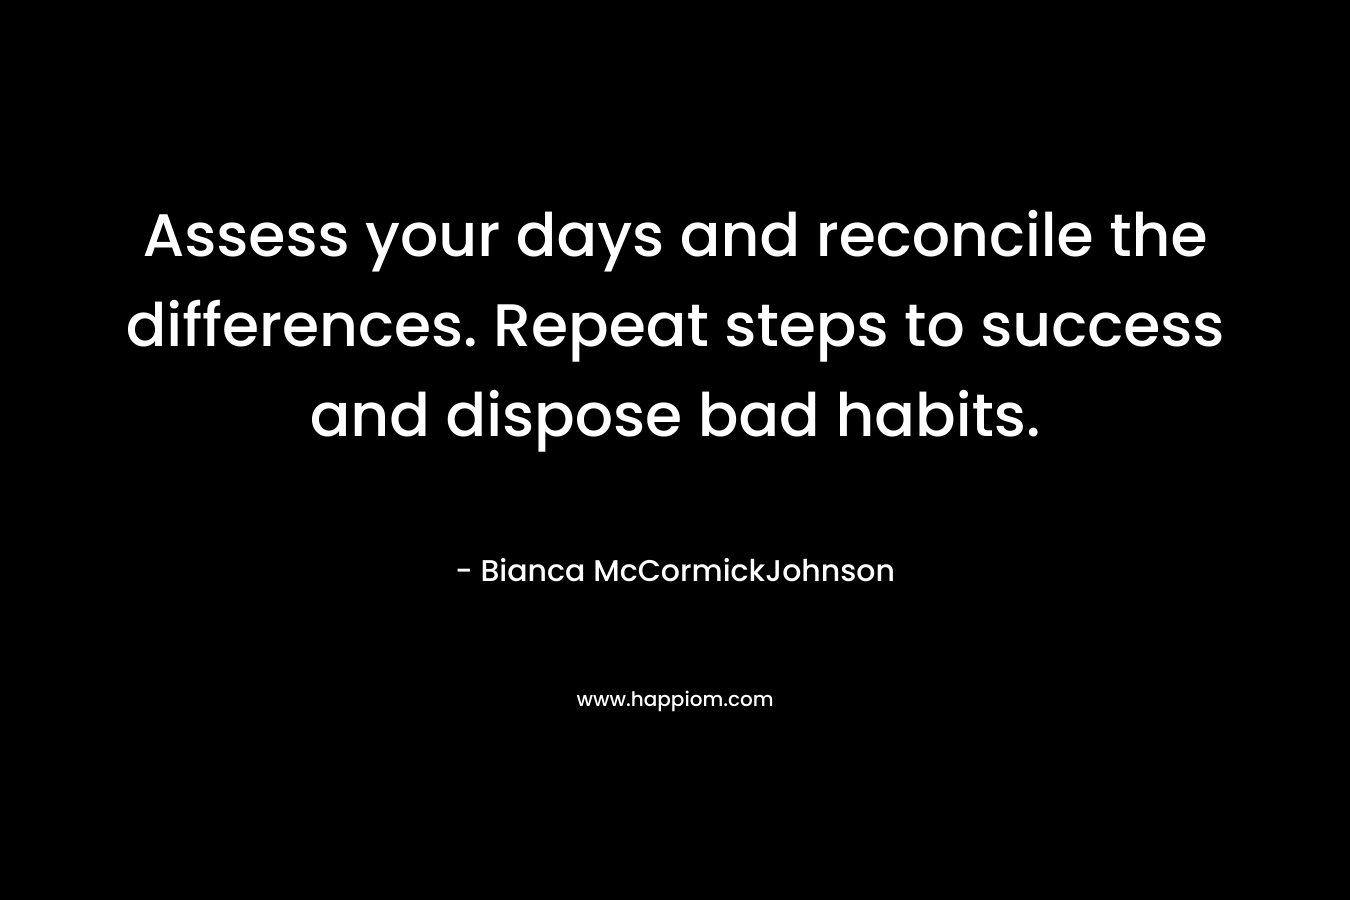 Assess your days and reconcile the differences. Repeat steps to success and dispose bad habits. – Bianca McCormickJohnson